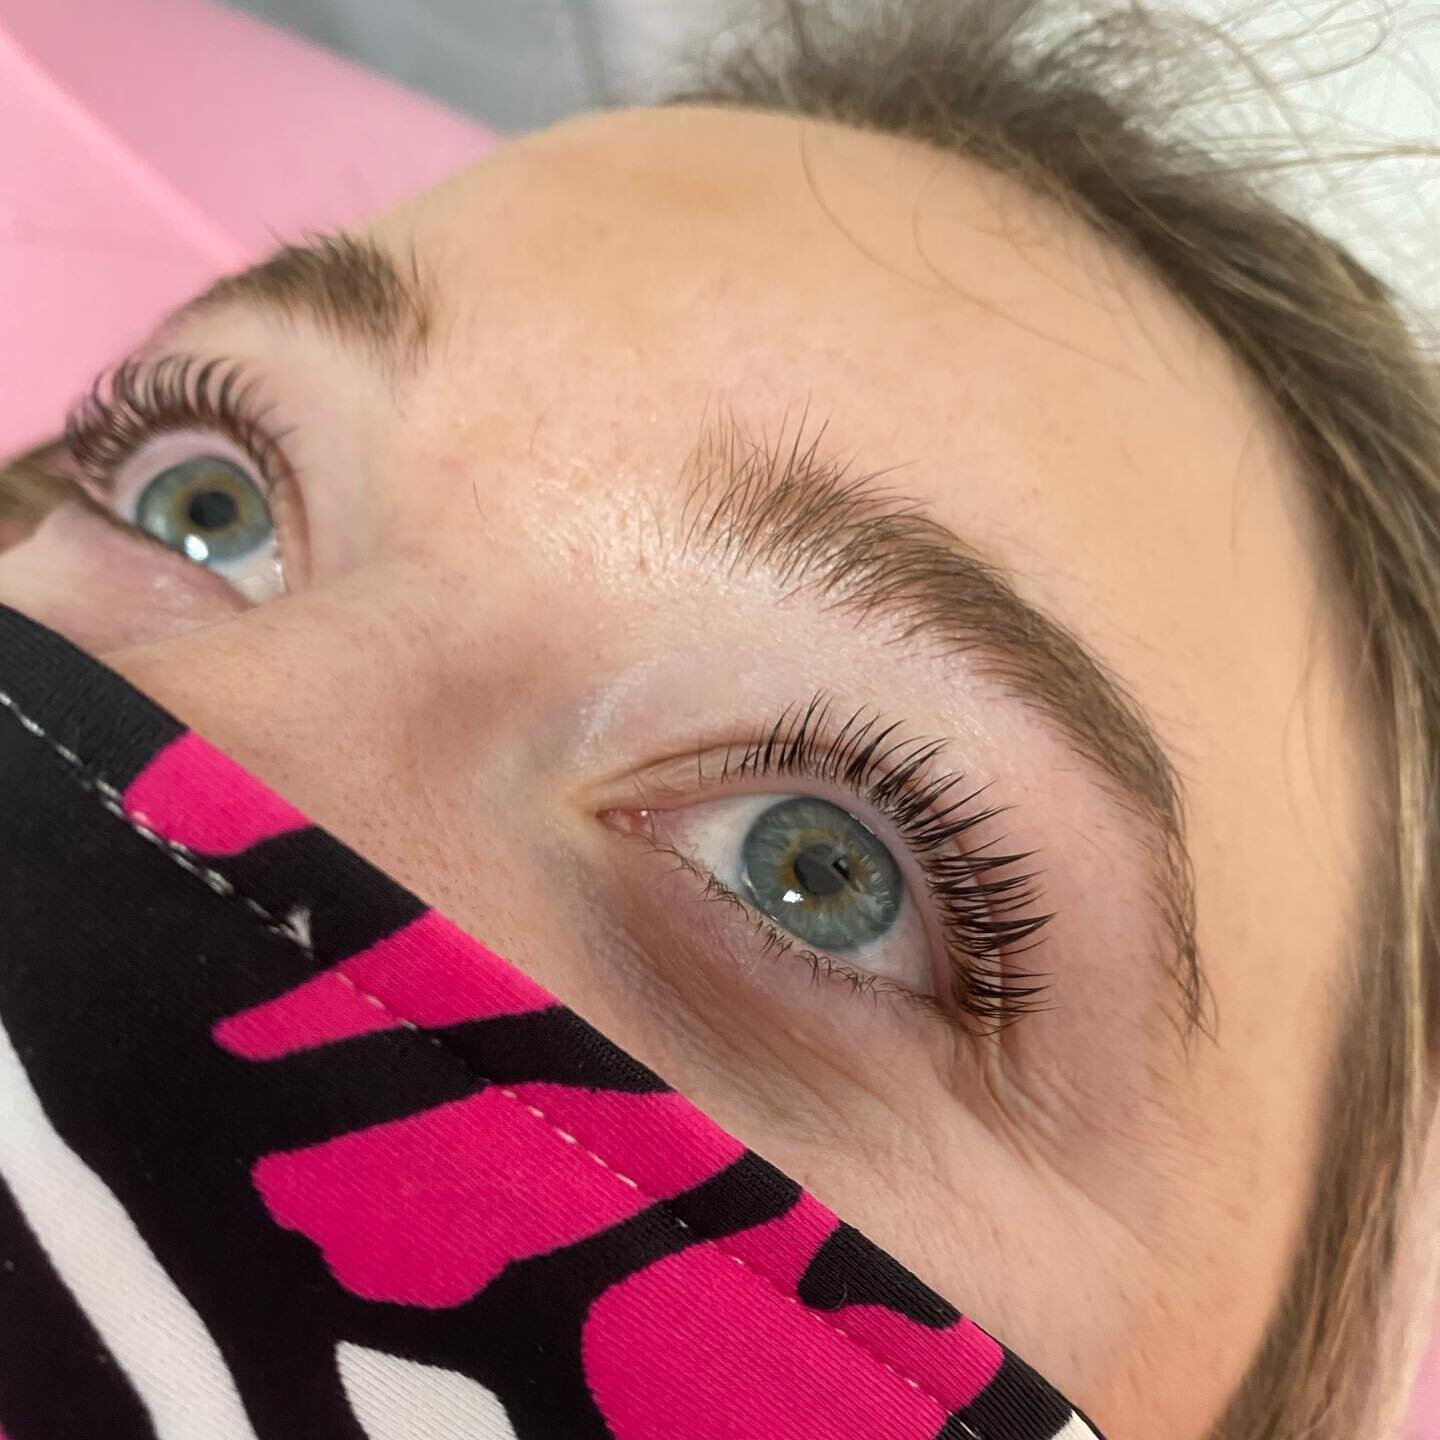 When I say &ldquo;eye&rdquo; you say &ldquo;can&rsquo;t believe they aren&rsquo;t lash extensions&rdquo; 😂 

Guys, for real though. 

This lash lift stuff is LIFE! So low maintenance and gives the illusion of having your lashes curled with mascara (